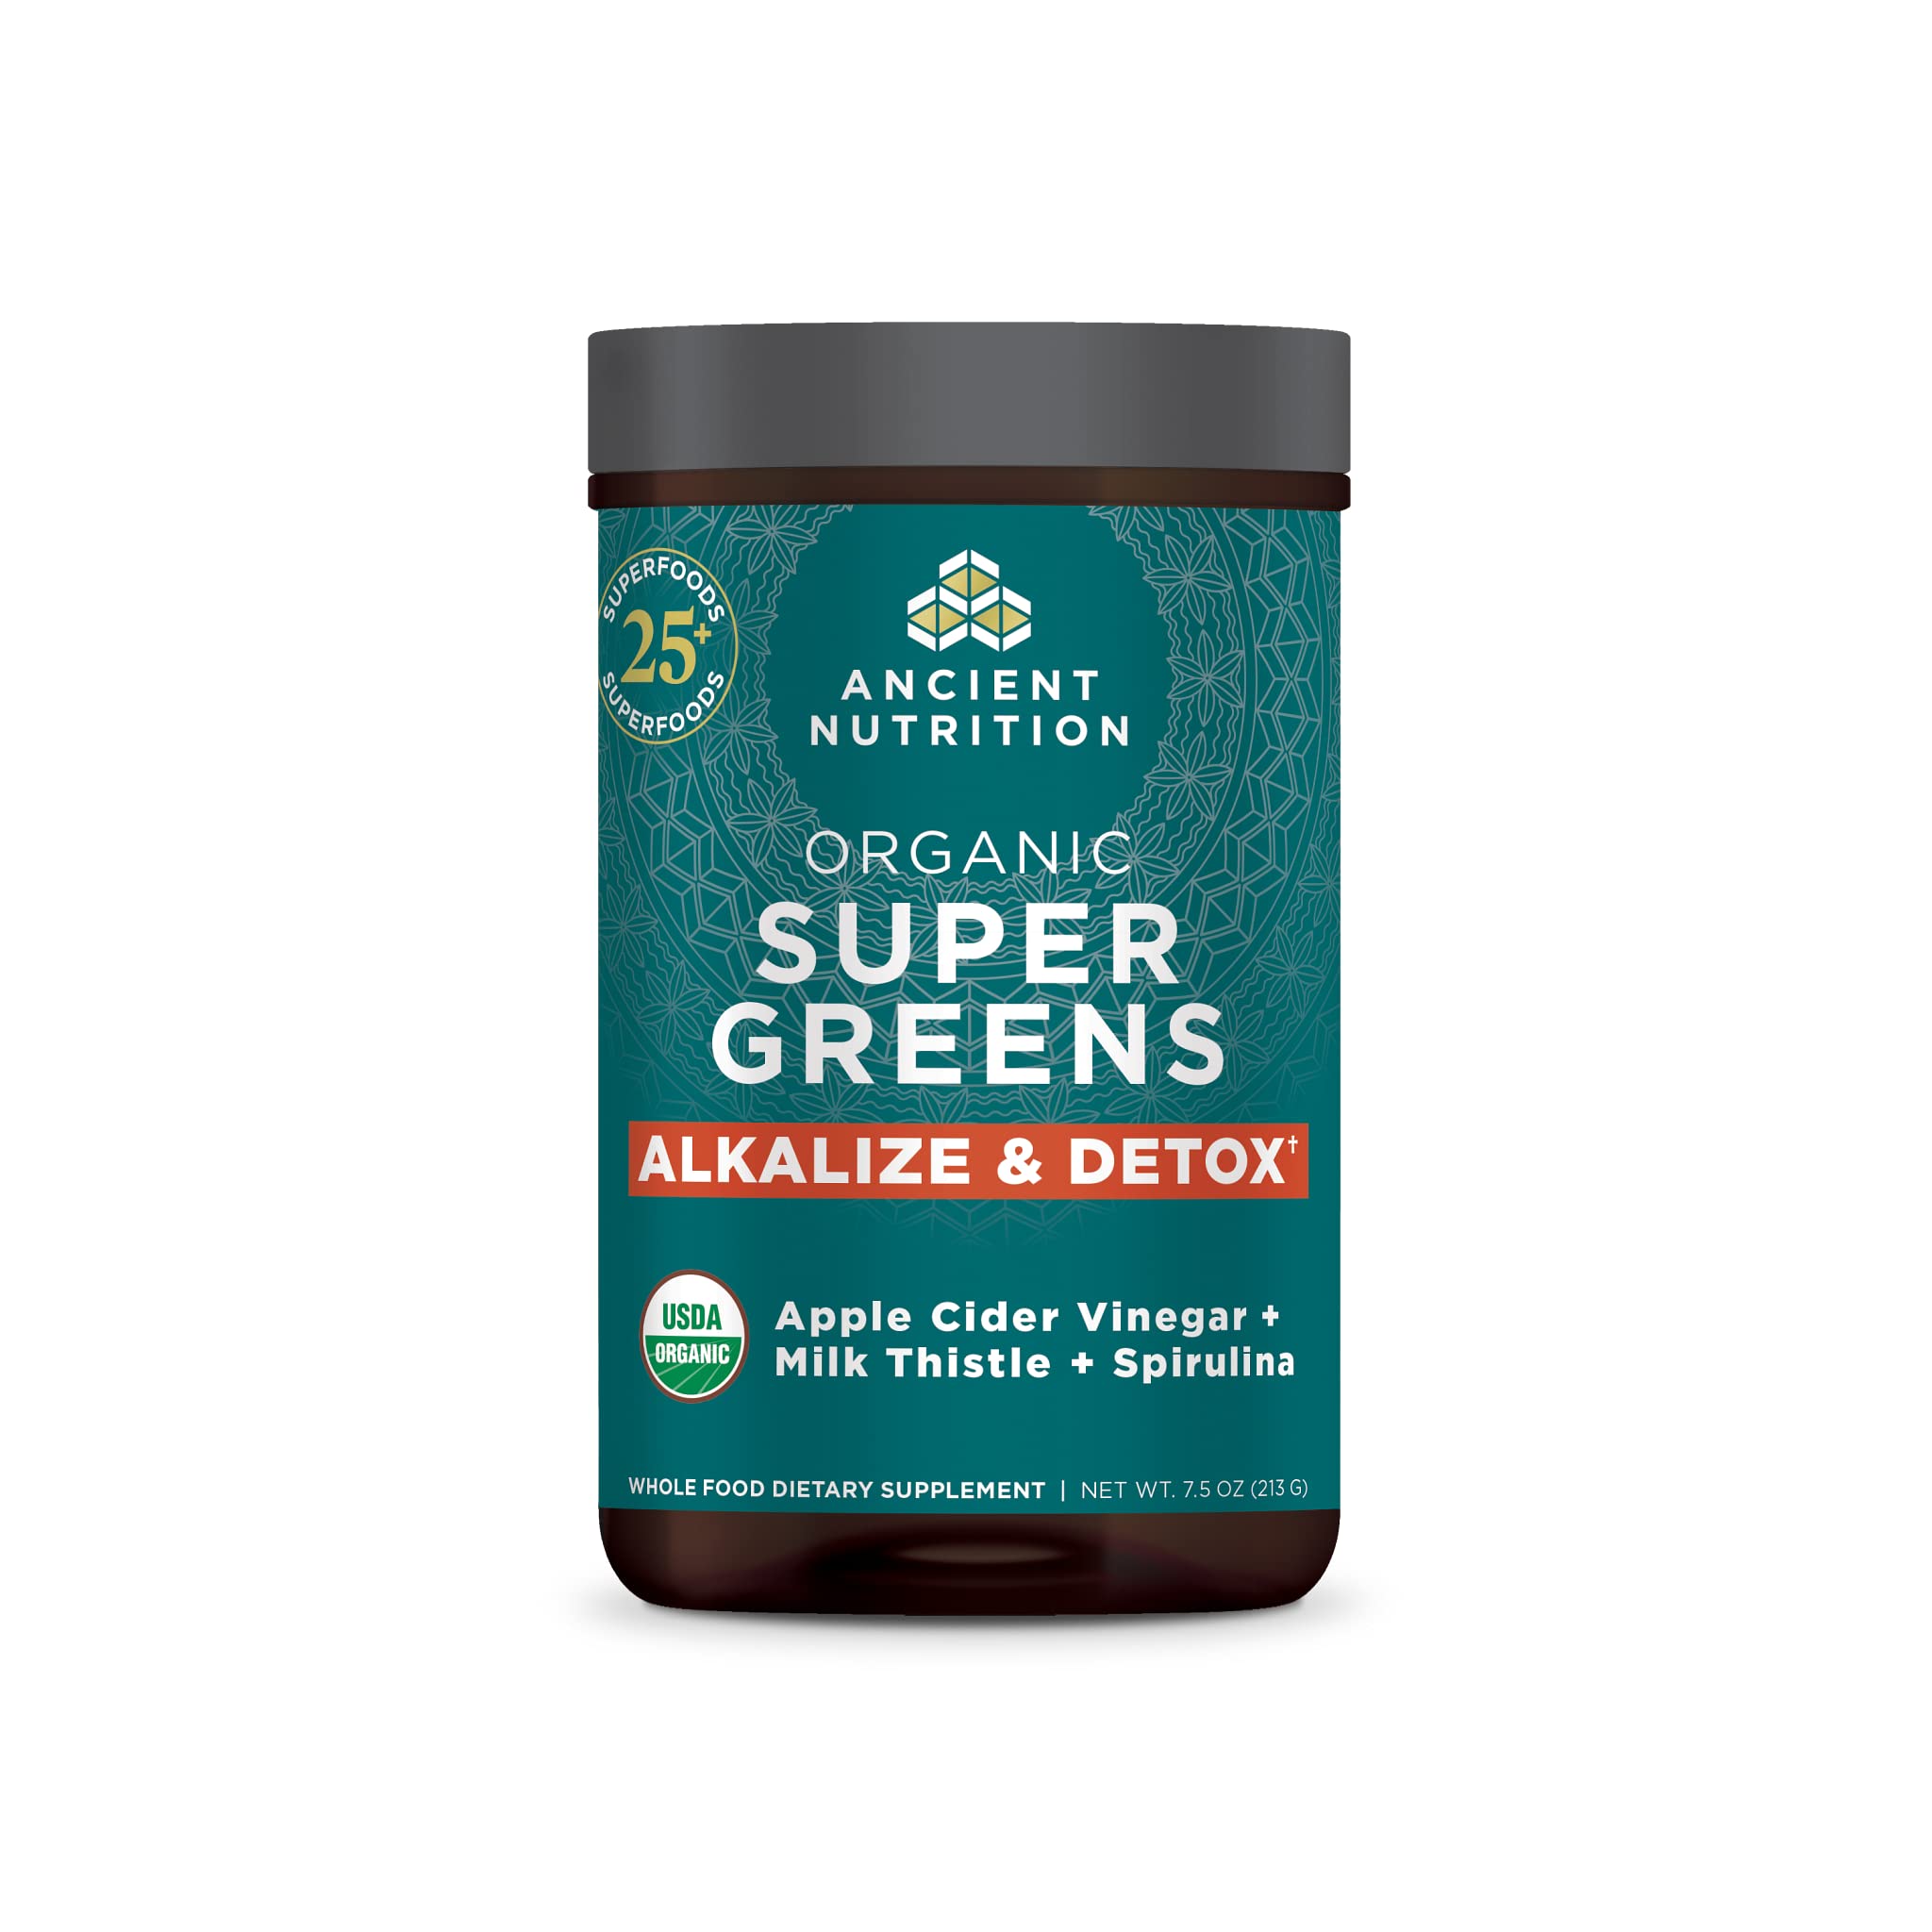 Ancient Nutrition Supergreens Alkalize & Detox Powder, Organic Superfood Powder Made from Real Fruits, Vegetables and Herbs, for Digestive and Energy Support, 25 Servings, 7.5oz